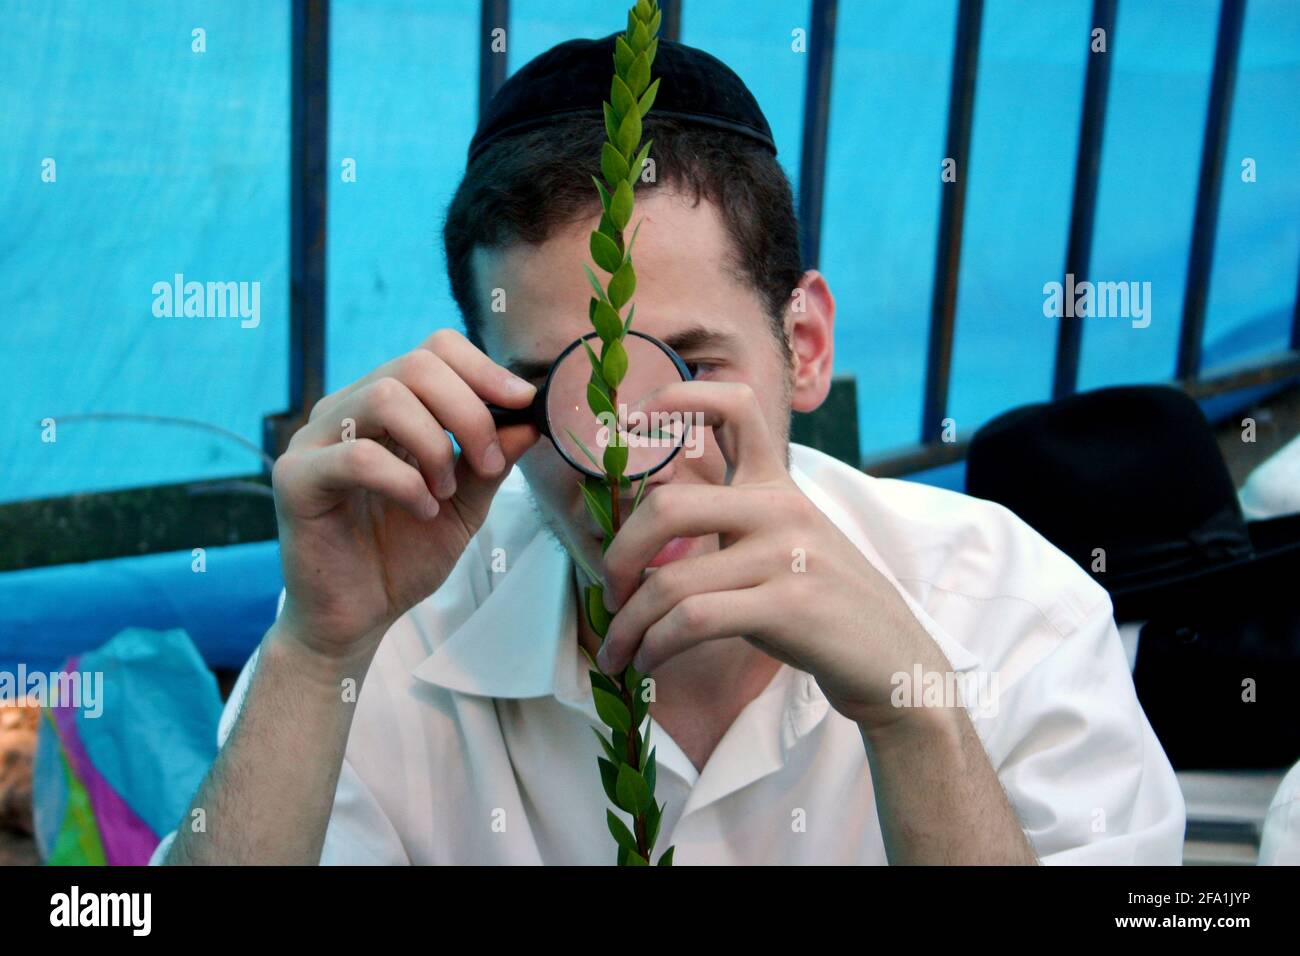 Israel, Jerusalem, Me'a She'arim, Closely examining the Hadas at the Sukkoth 4 species market. Of the many symbols associated with Sukkot the most imp Stock Photo